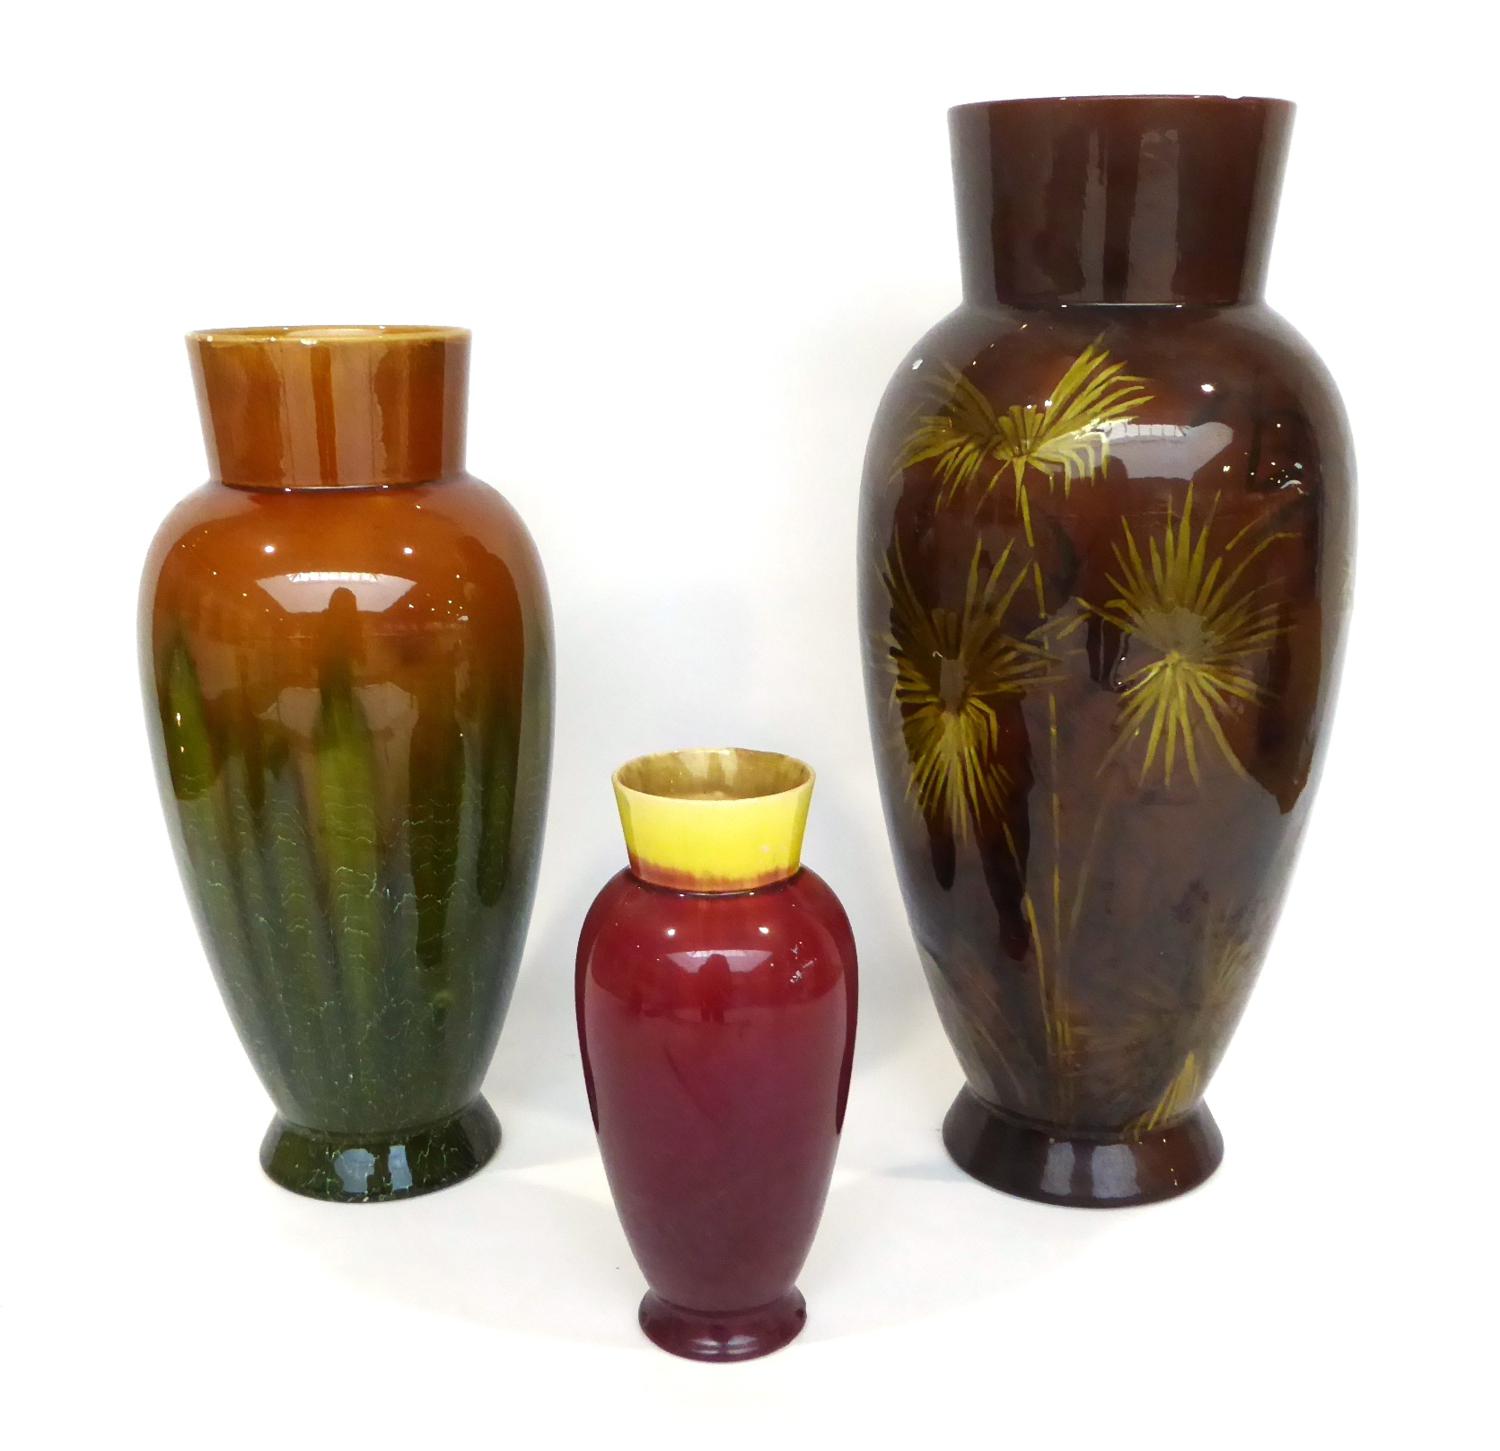 477 876 877  Three Linthorpe Pottery Vases, shape 477, painted by Rachel Smith with yellow flowers